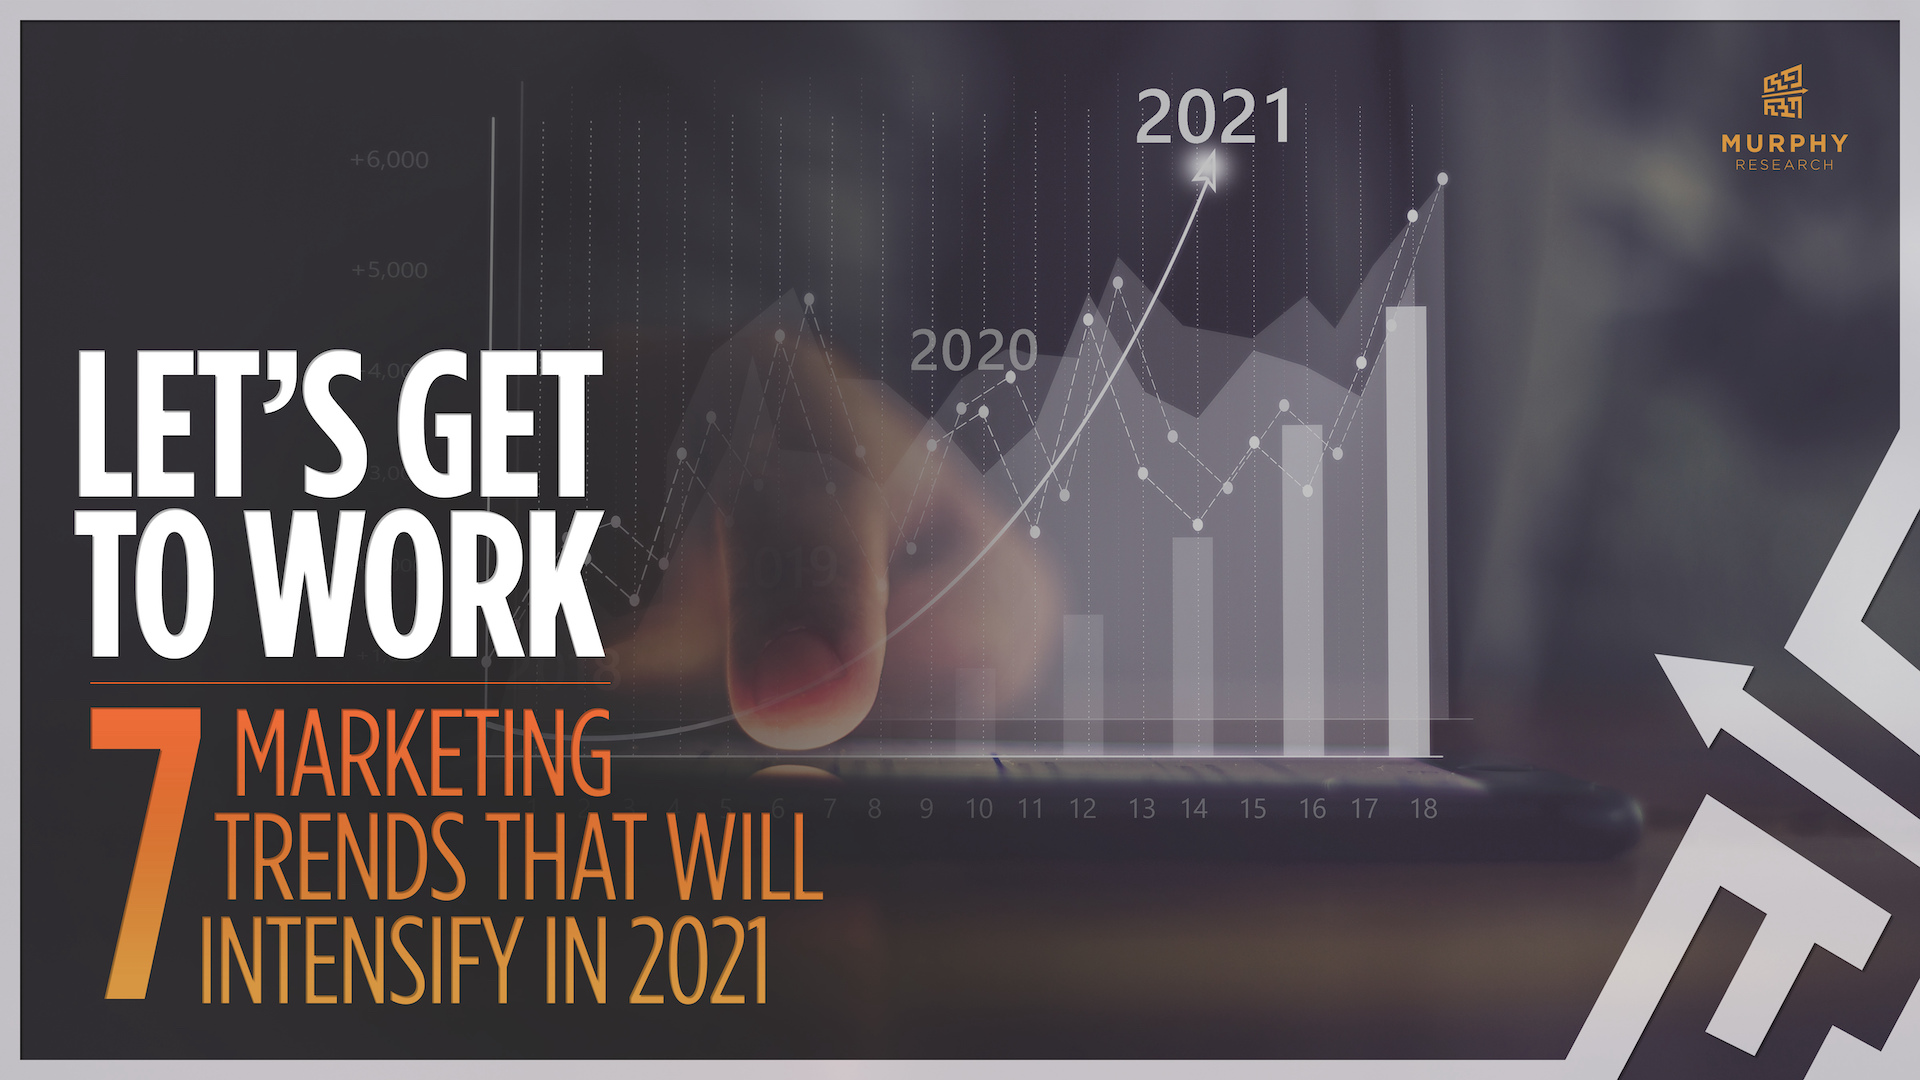 Let’s Get to Work: 7 Marketing Trends That Will Intensify in 2021